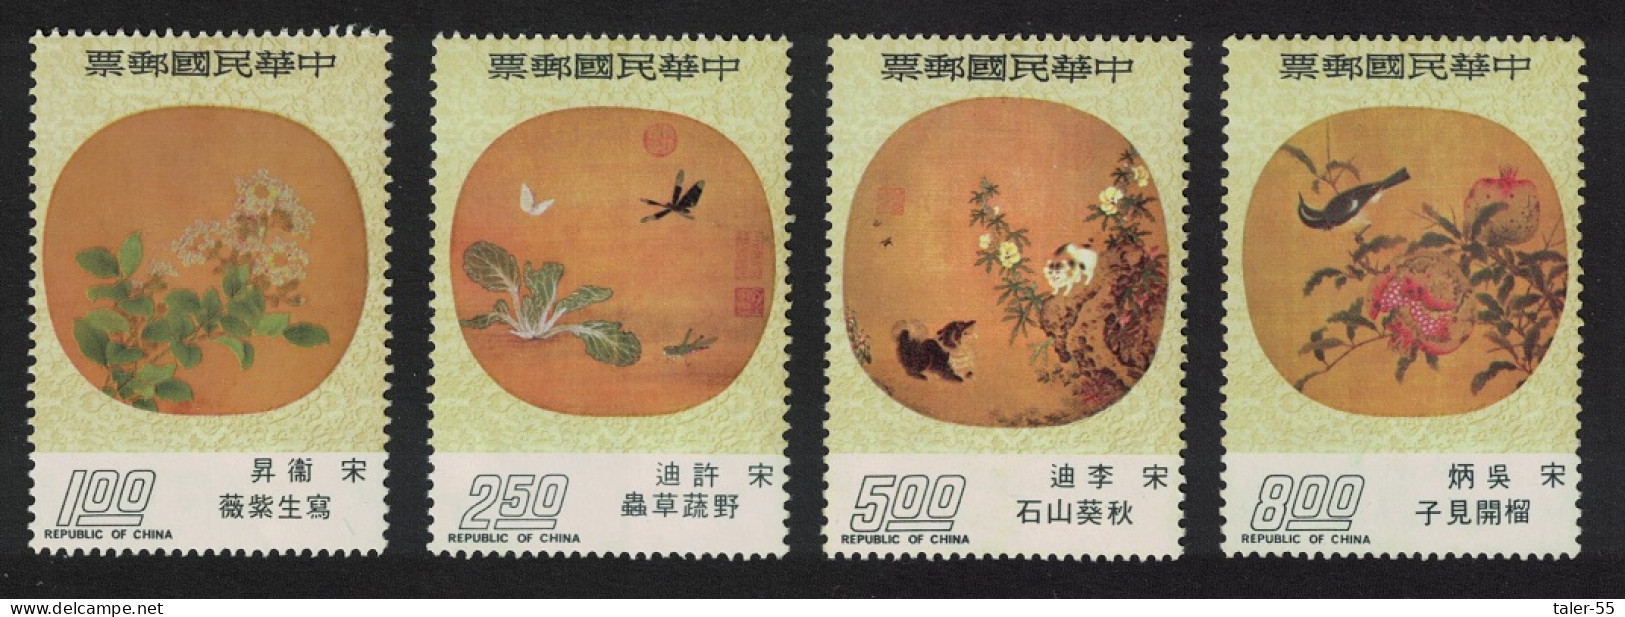 Taiwan Birds Ancient Chinese Moon-shaped Fan-paintings 4v 1974 MNH SG#1008-1011 - Nuovi